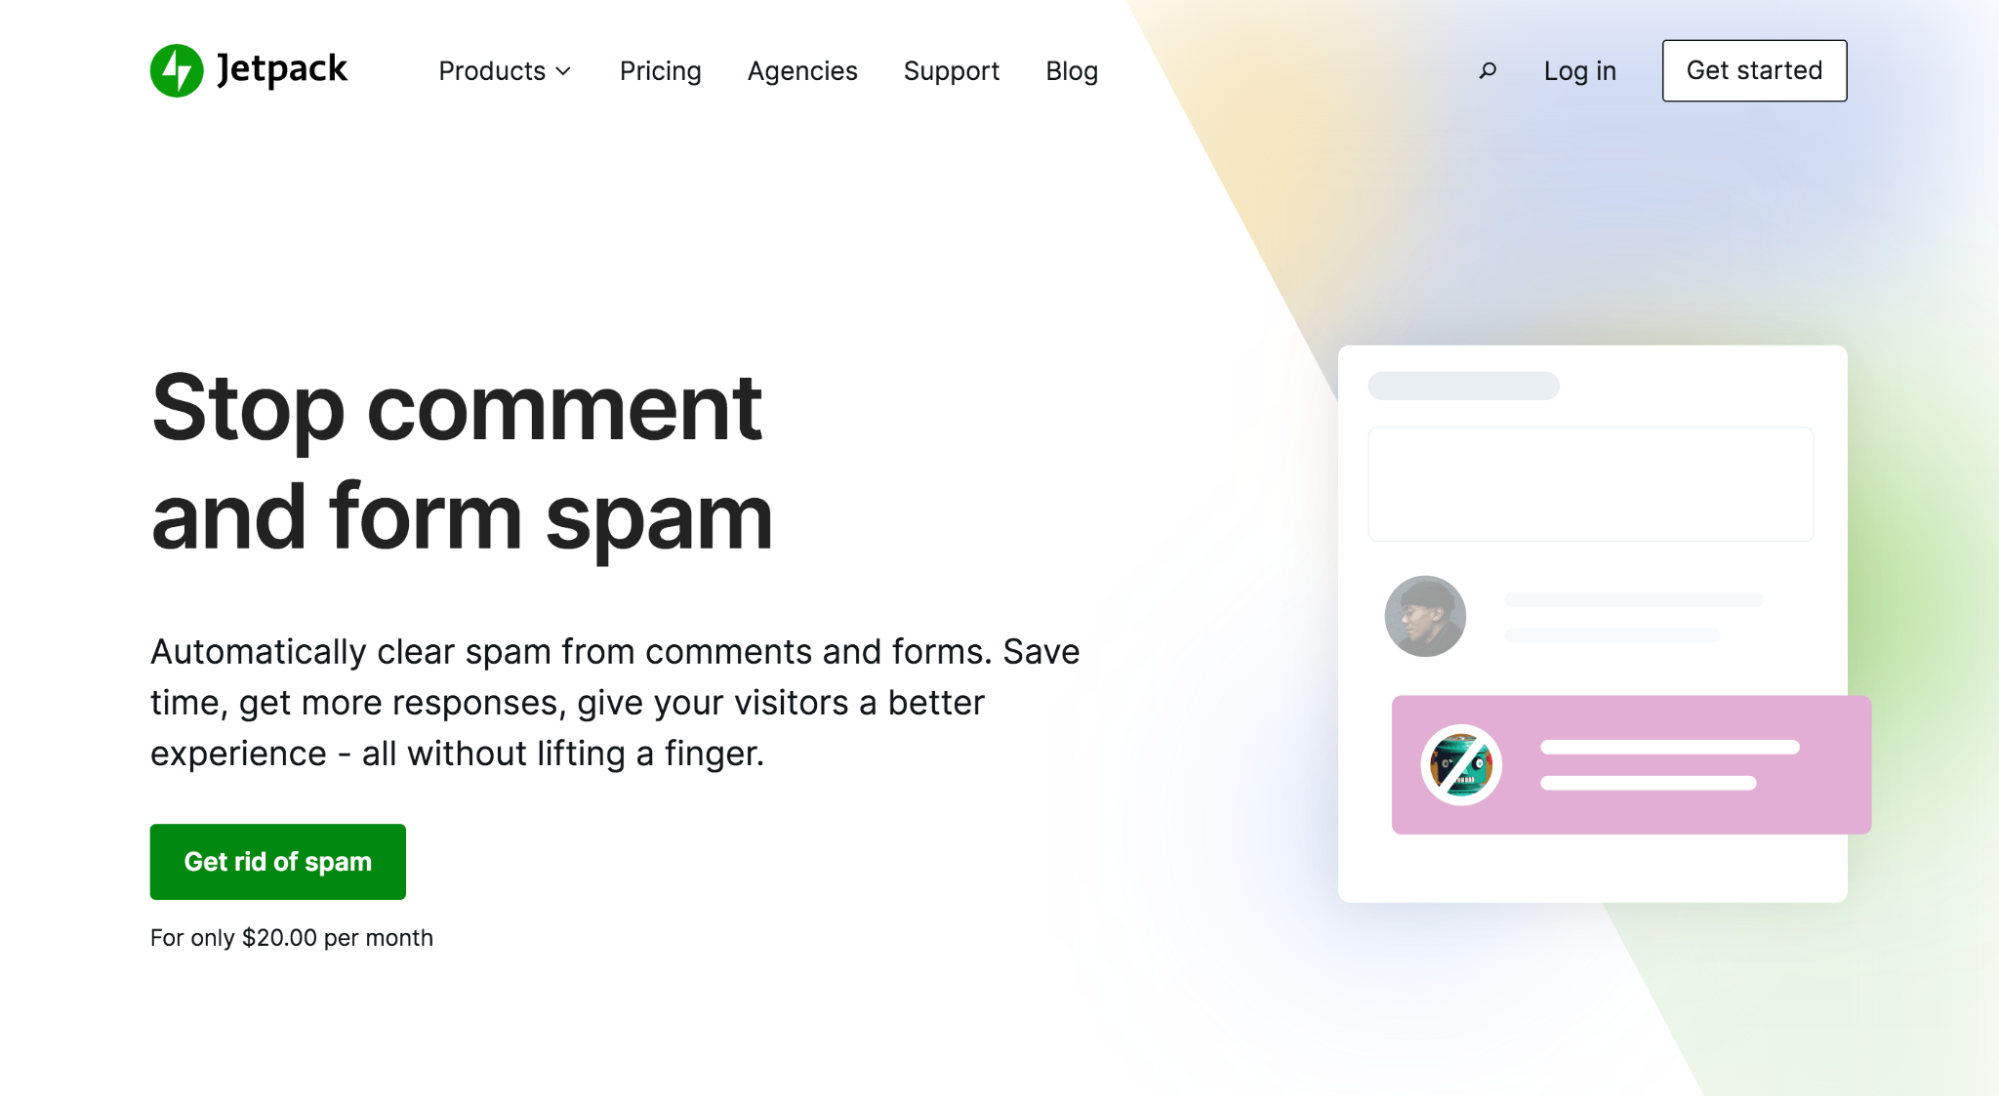 homepage hero image per Jetpack Anti-Spam con lo slogan "Stop comment and form spam".